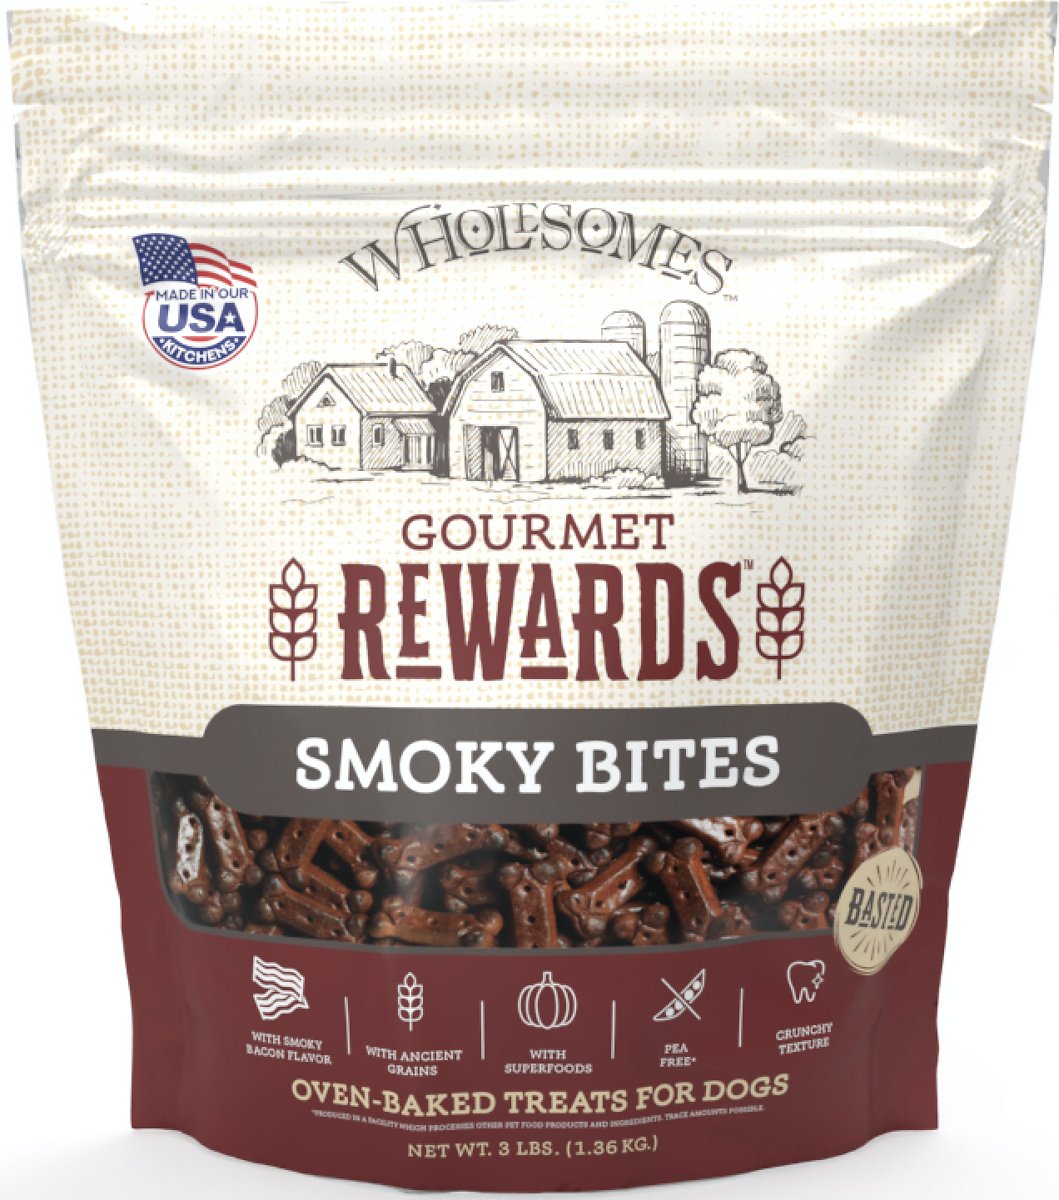 SPORTMiX Wholesomes Gourmet Smoky Bites Biscuits Dog Treats